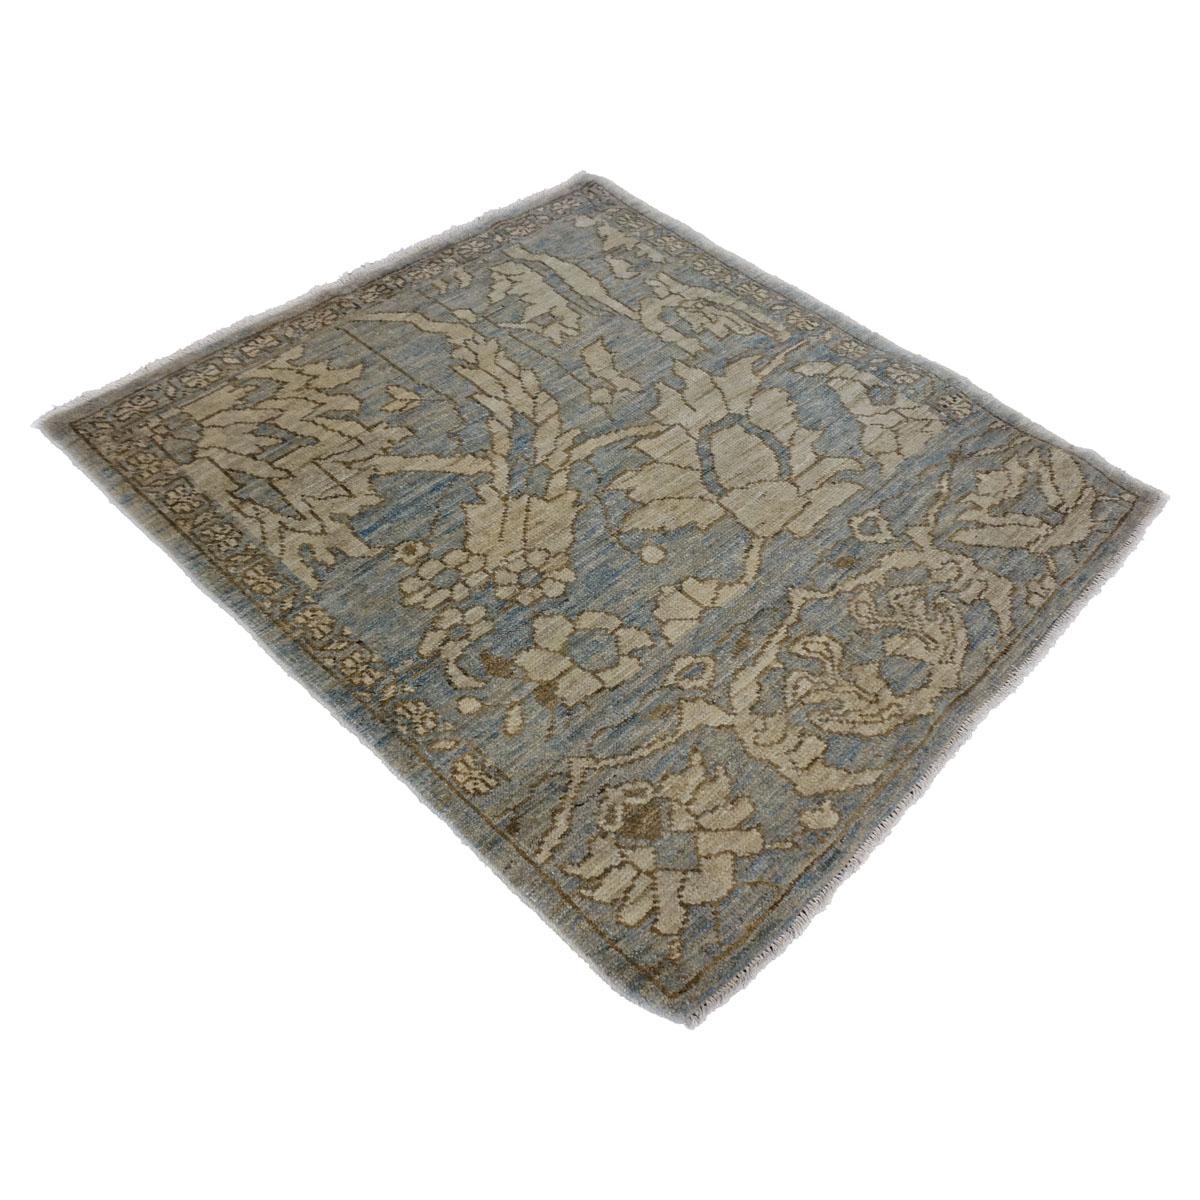 Ashly Fine Rugs presents an antique recreation of an original Persian Sultanabad 3x3 Slate Blue & Grey Handmade Area Rug. Part of our own previous production, this antique recreation was thought of and created in-house and 100% handmade in Iran by